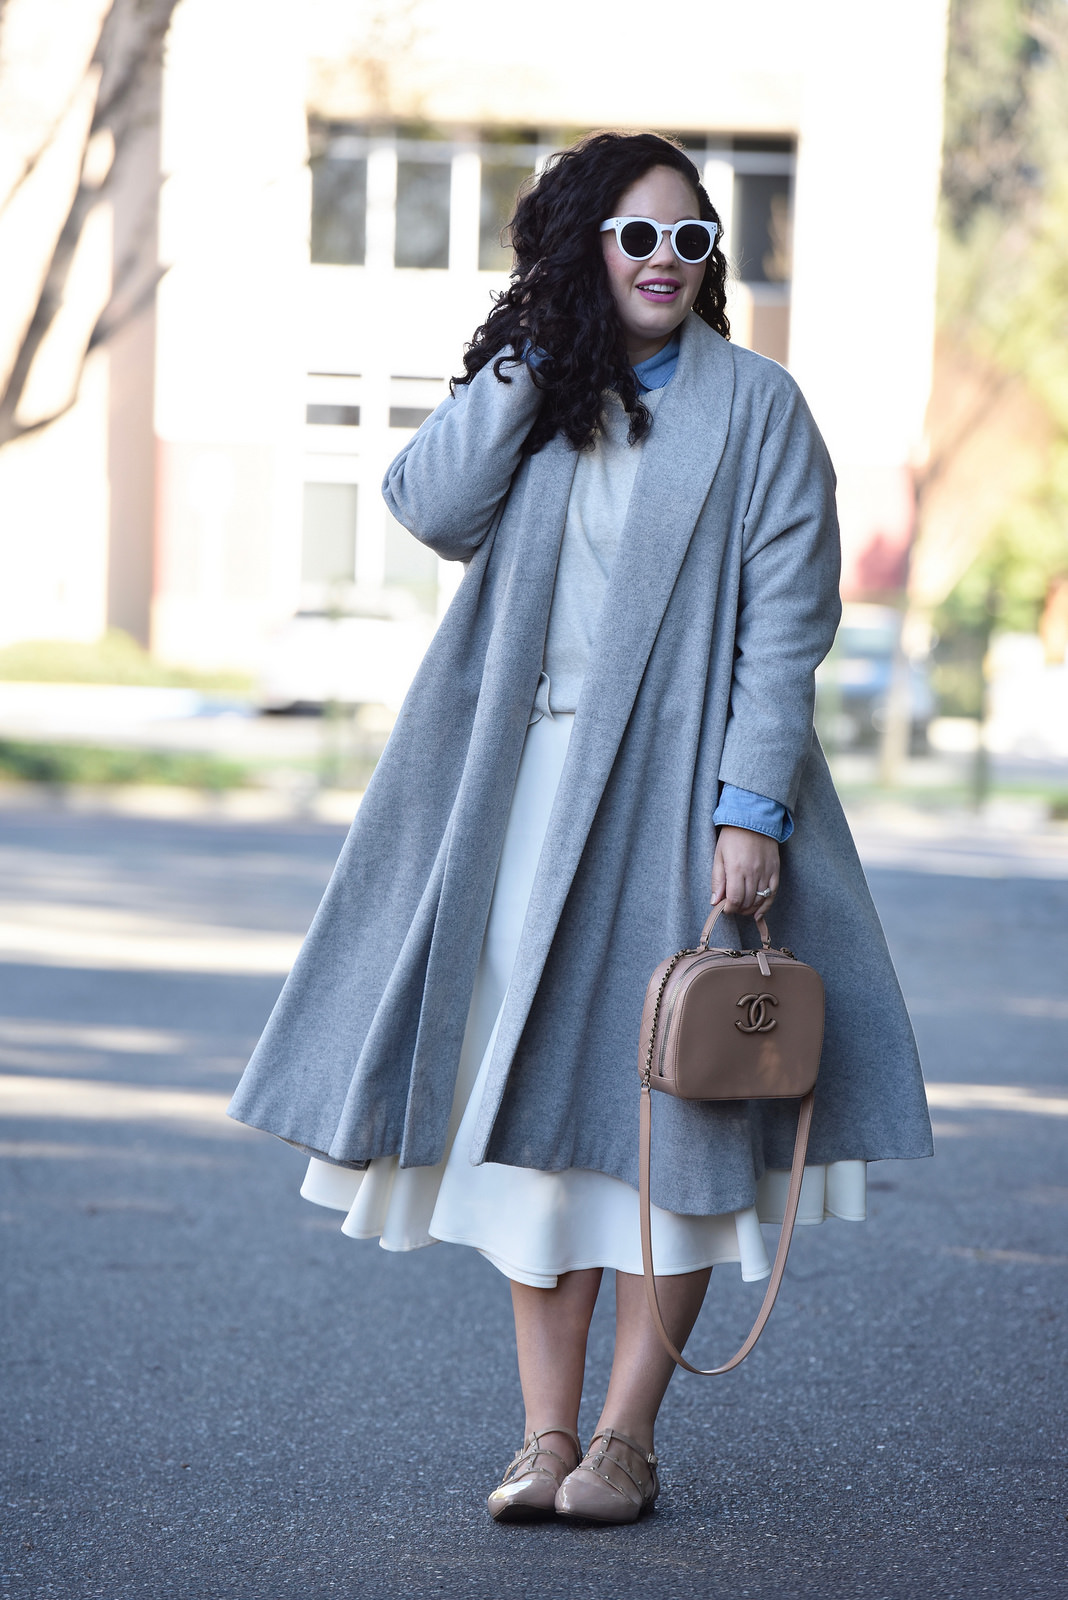 Stay Stylish and Warm with this Easy Layering Trick